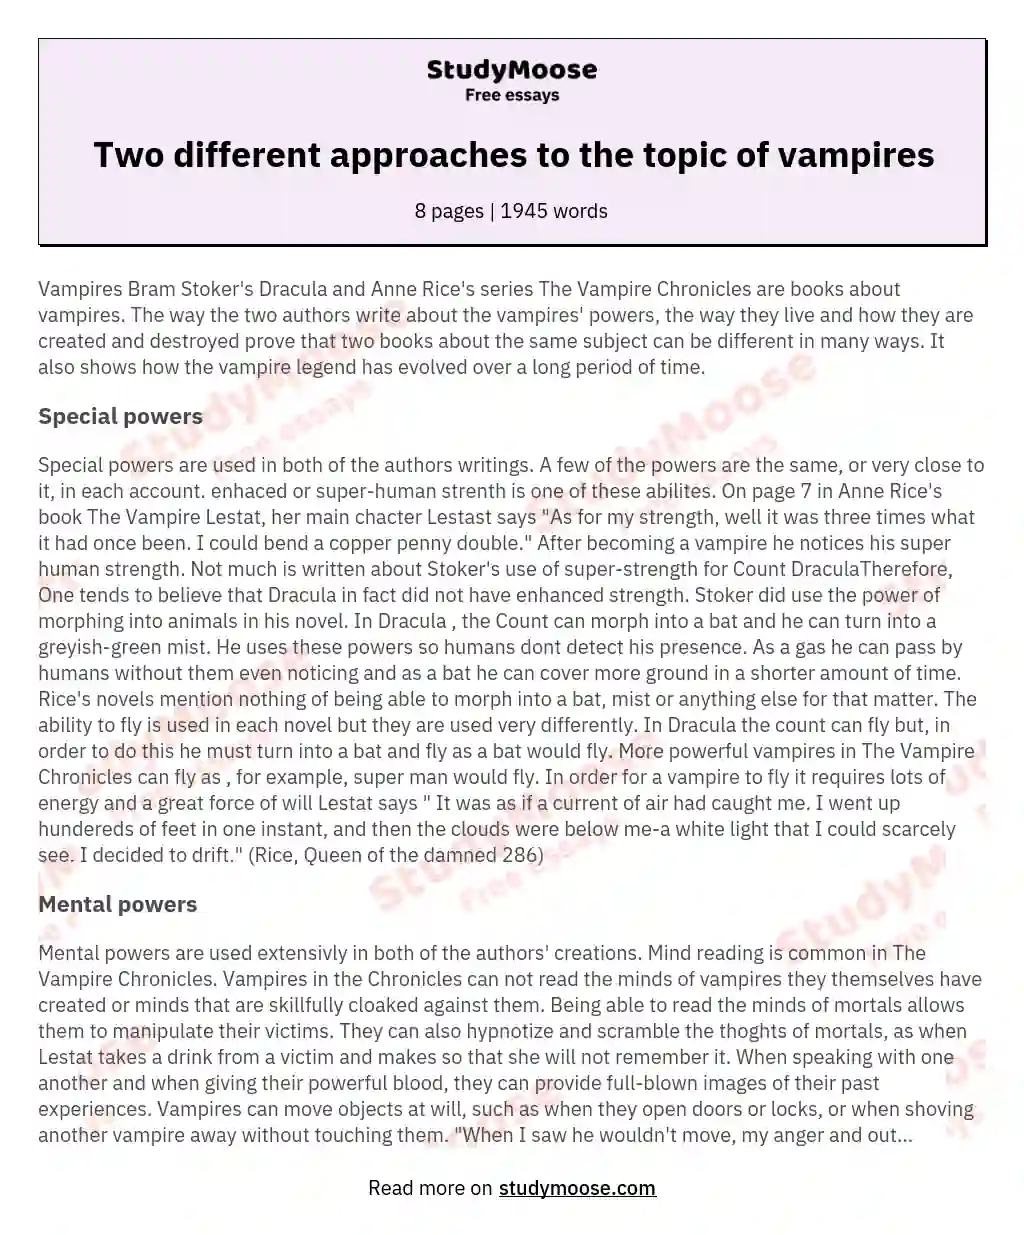 Two different approaches to the topic of vampires